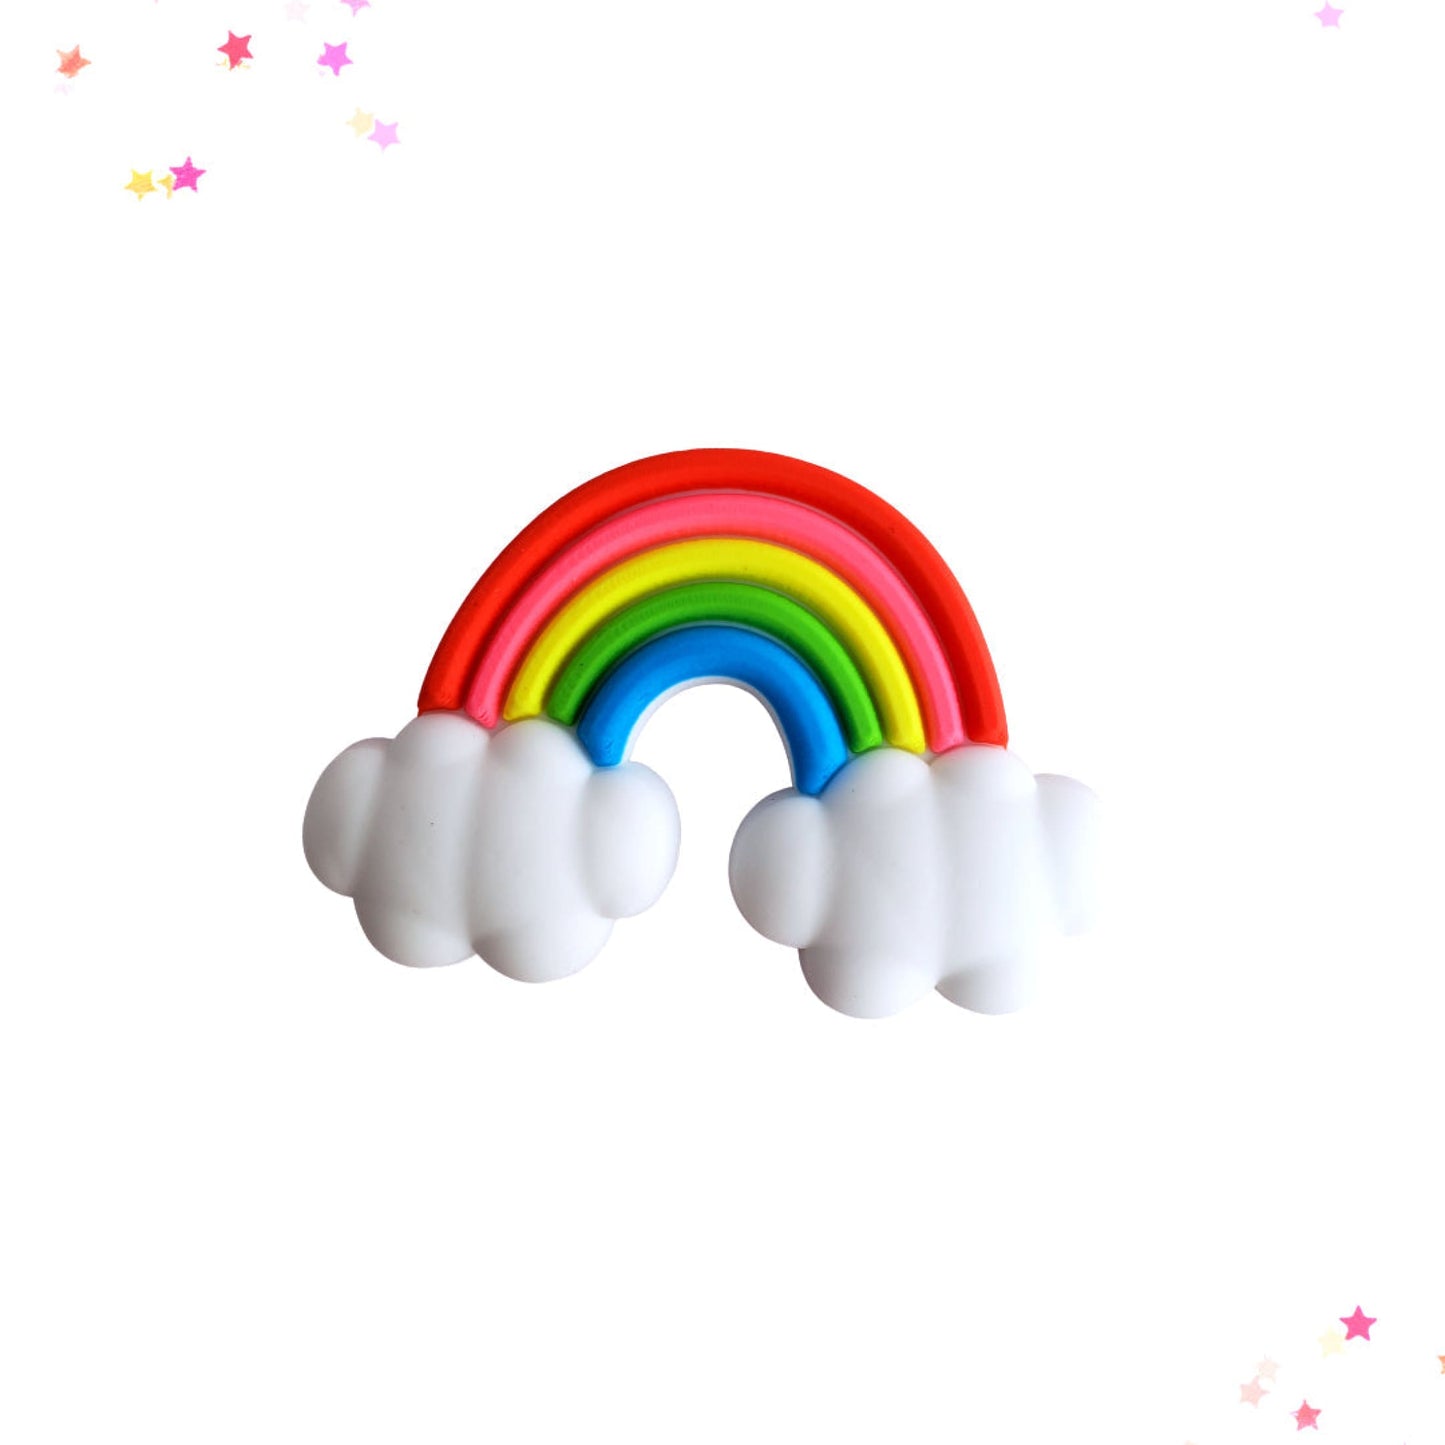 Pretty Rainbow Magnet from Confetti Kitty, Only 1.99